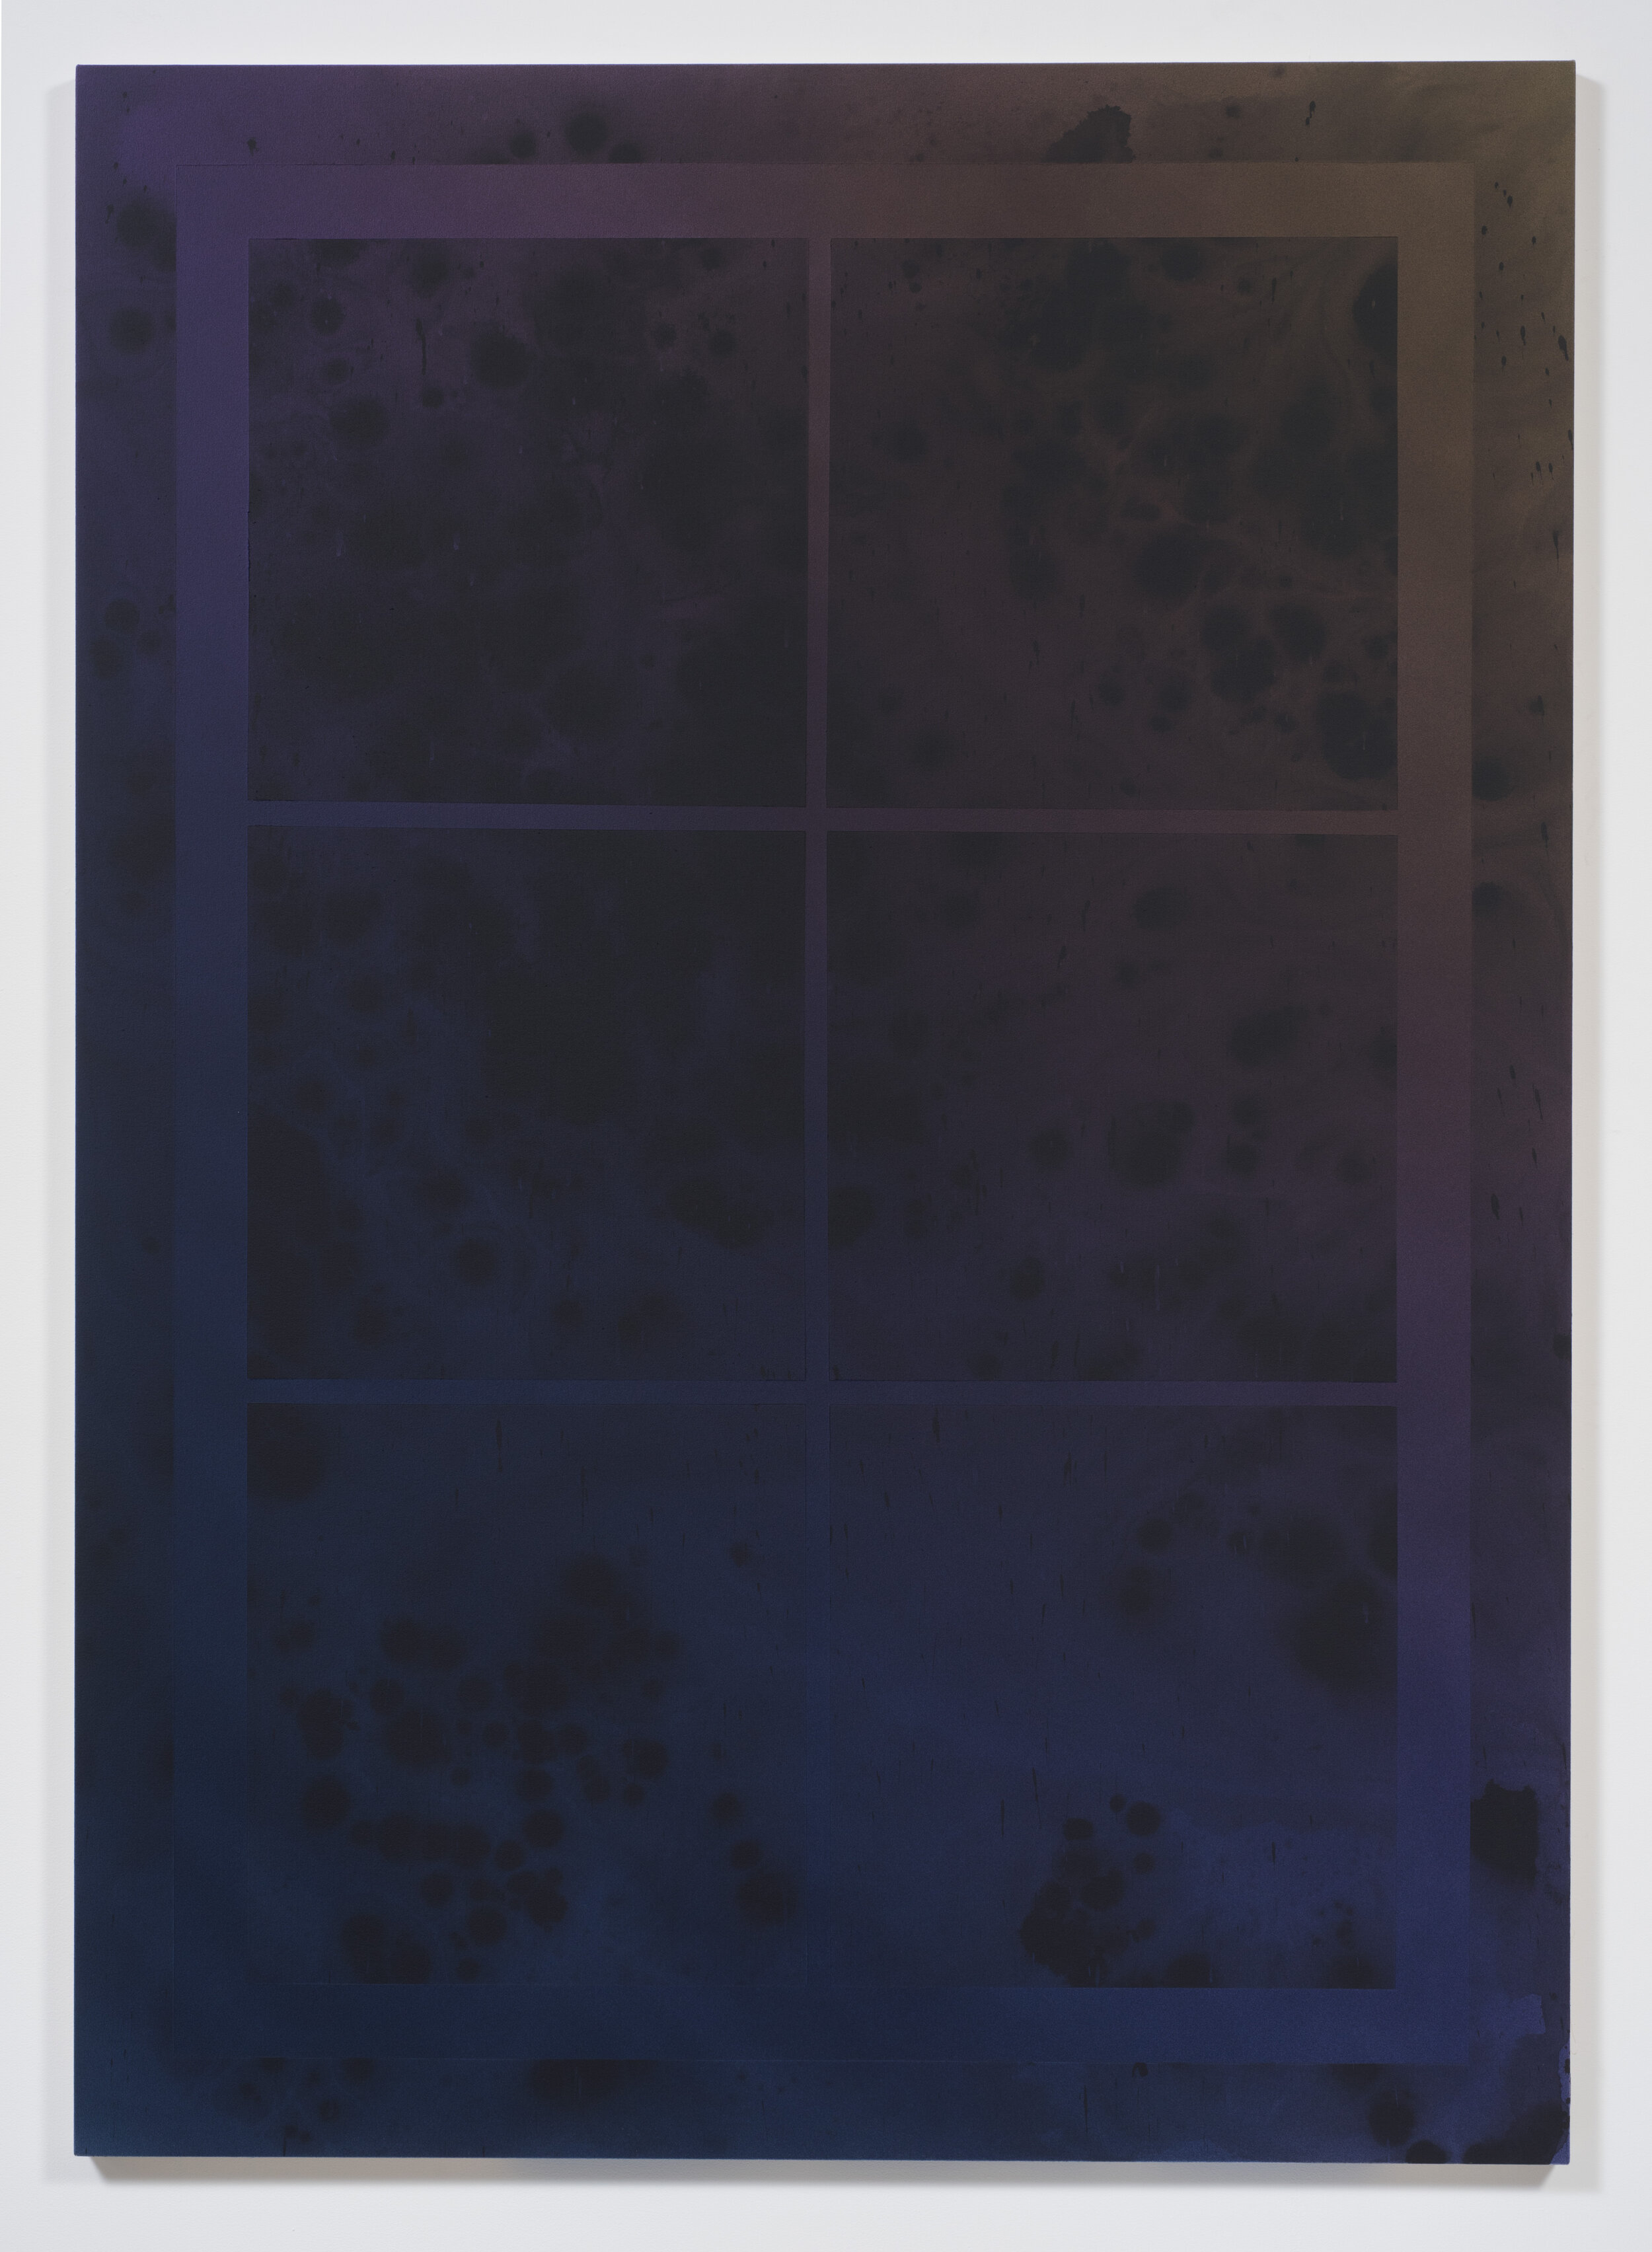   Untitled Painting in Navy Violet and Olive w/ Window,  2014. Acrylic on canvas. 84 x 60 inches 